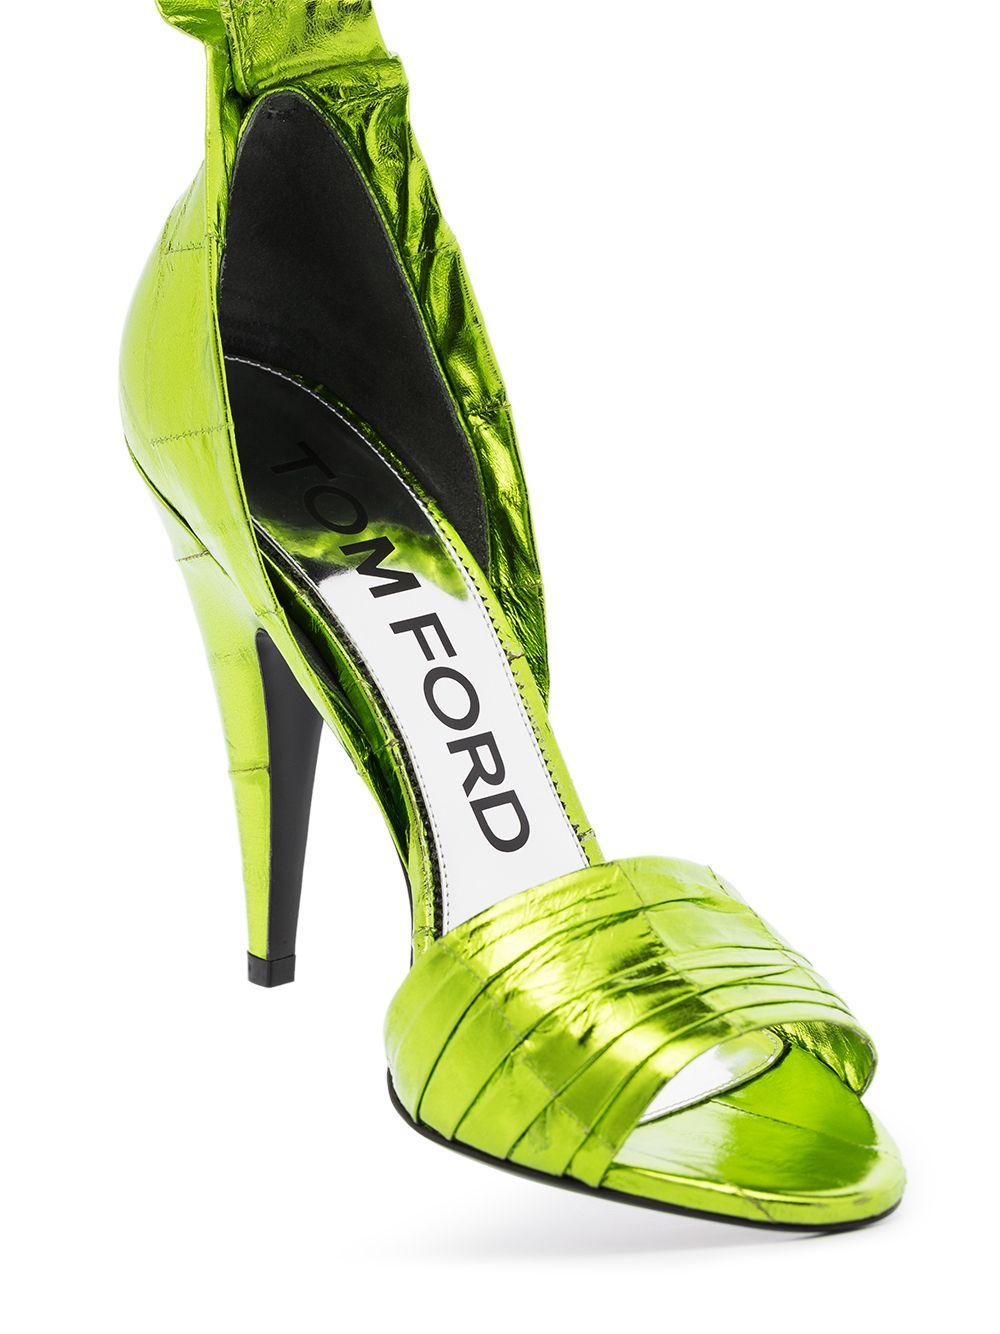 Tom Ford 105 Ankle Wrap Sandals in Green | Lyst